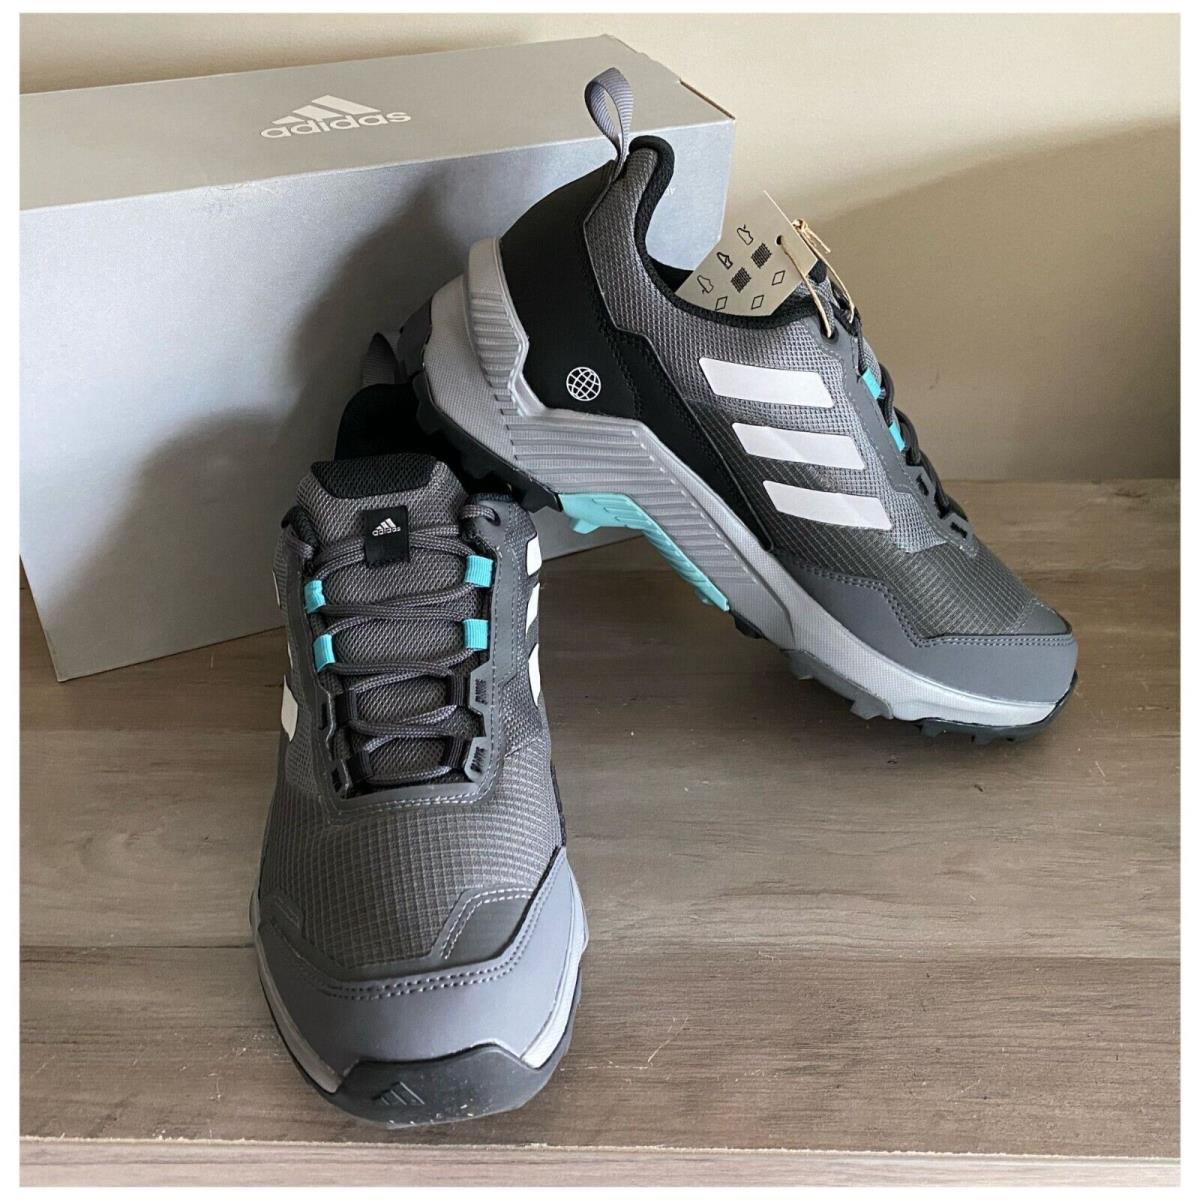 Adidas Sneakers Eastrail 2.0 Rain.rdy Hiking Shoes Grey / Mint 10